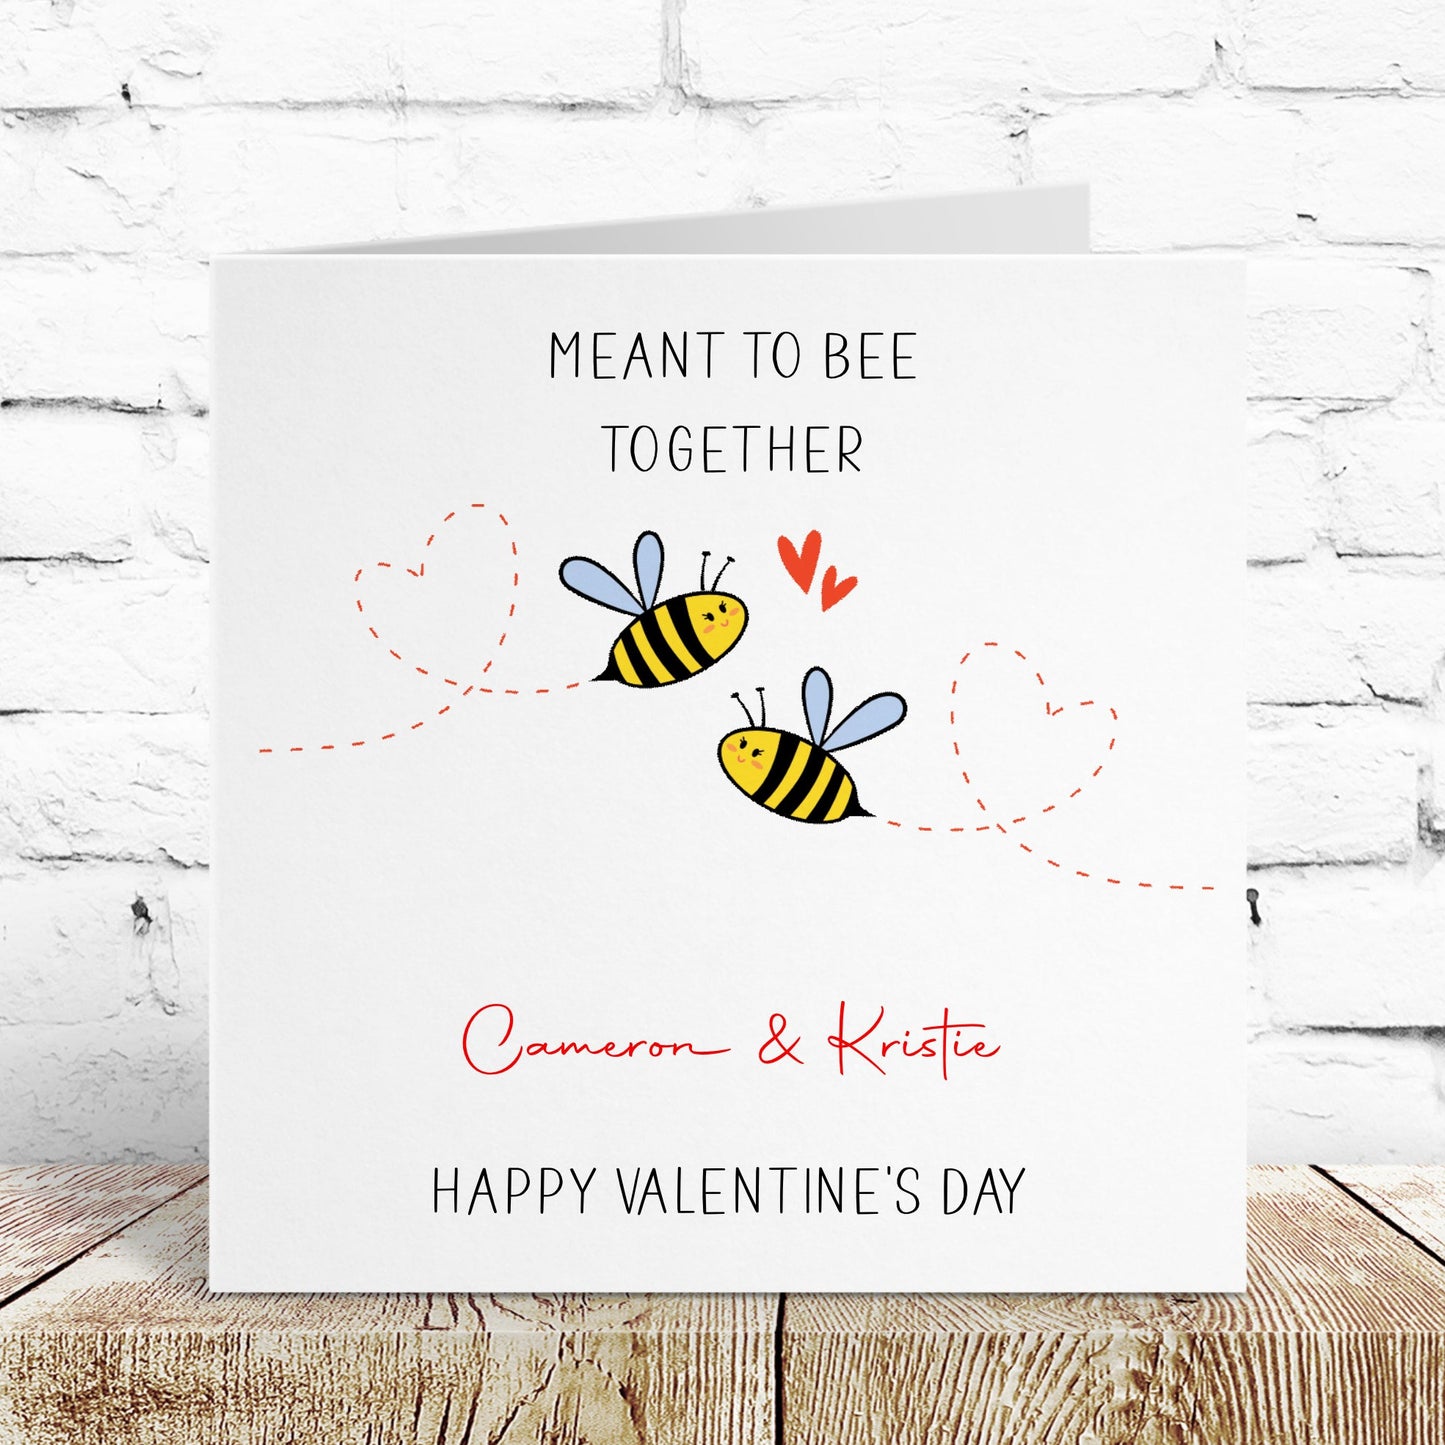 Personalised Happy Valentine's Day Card Meant To Bee